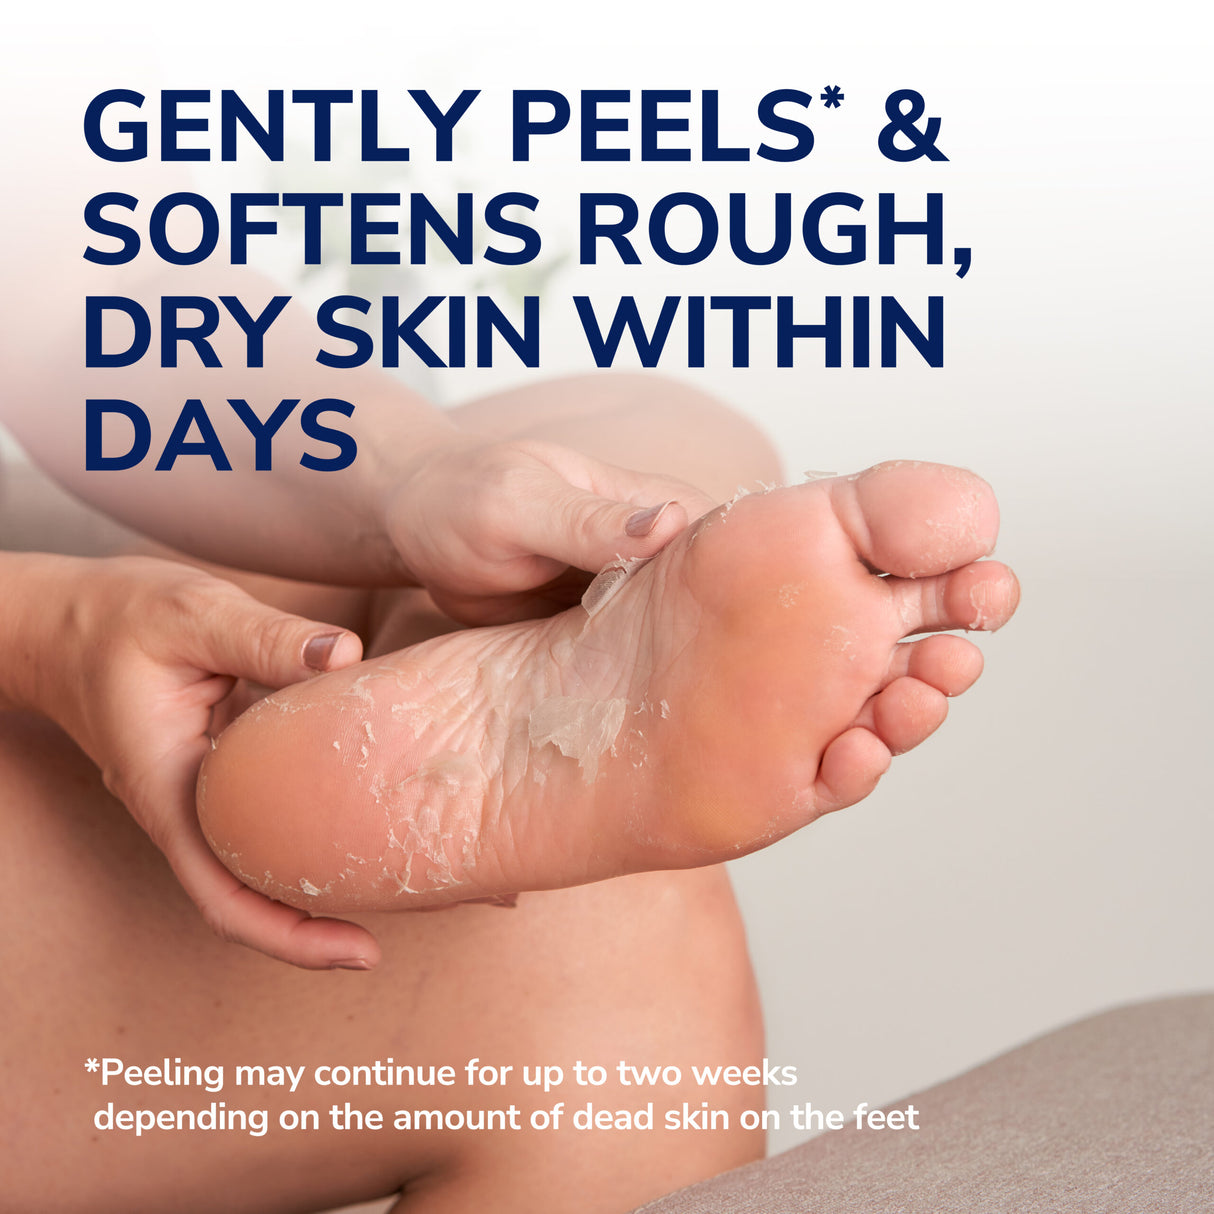 image of gently peels and softens rough, dry skin within days